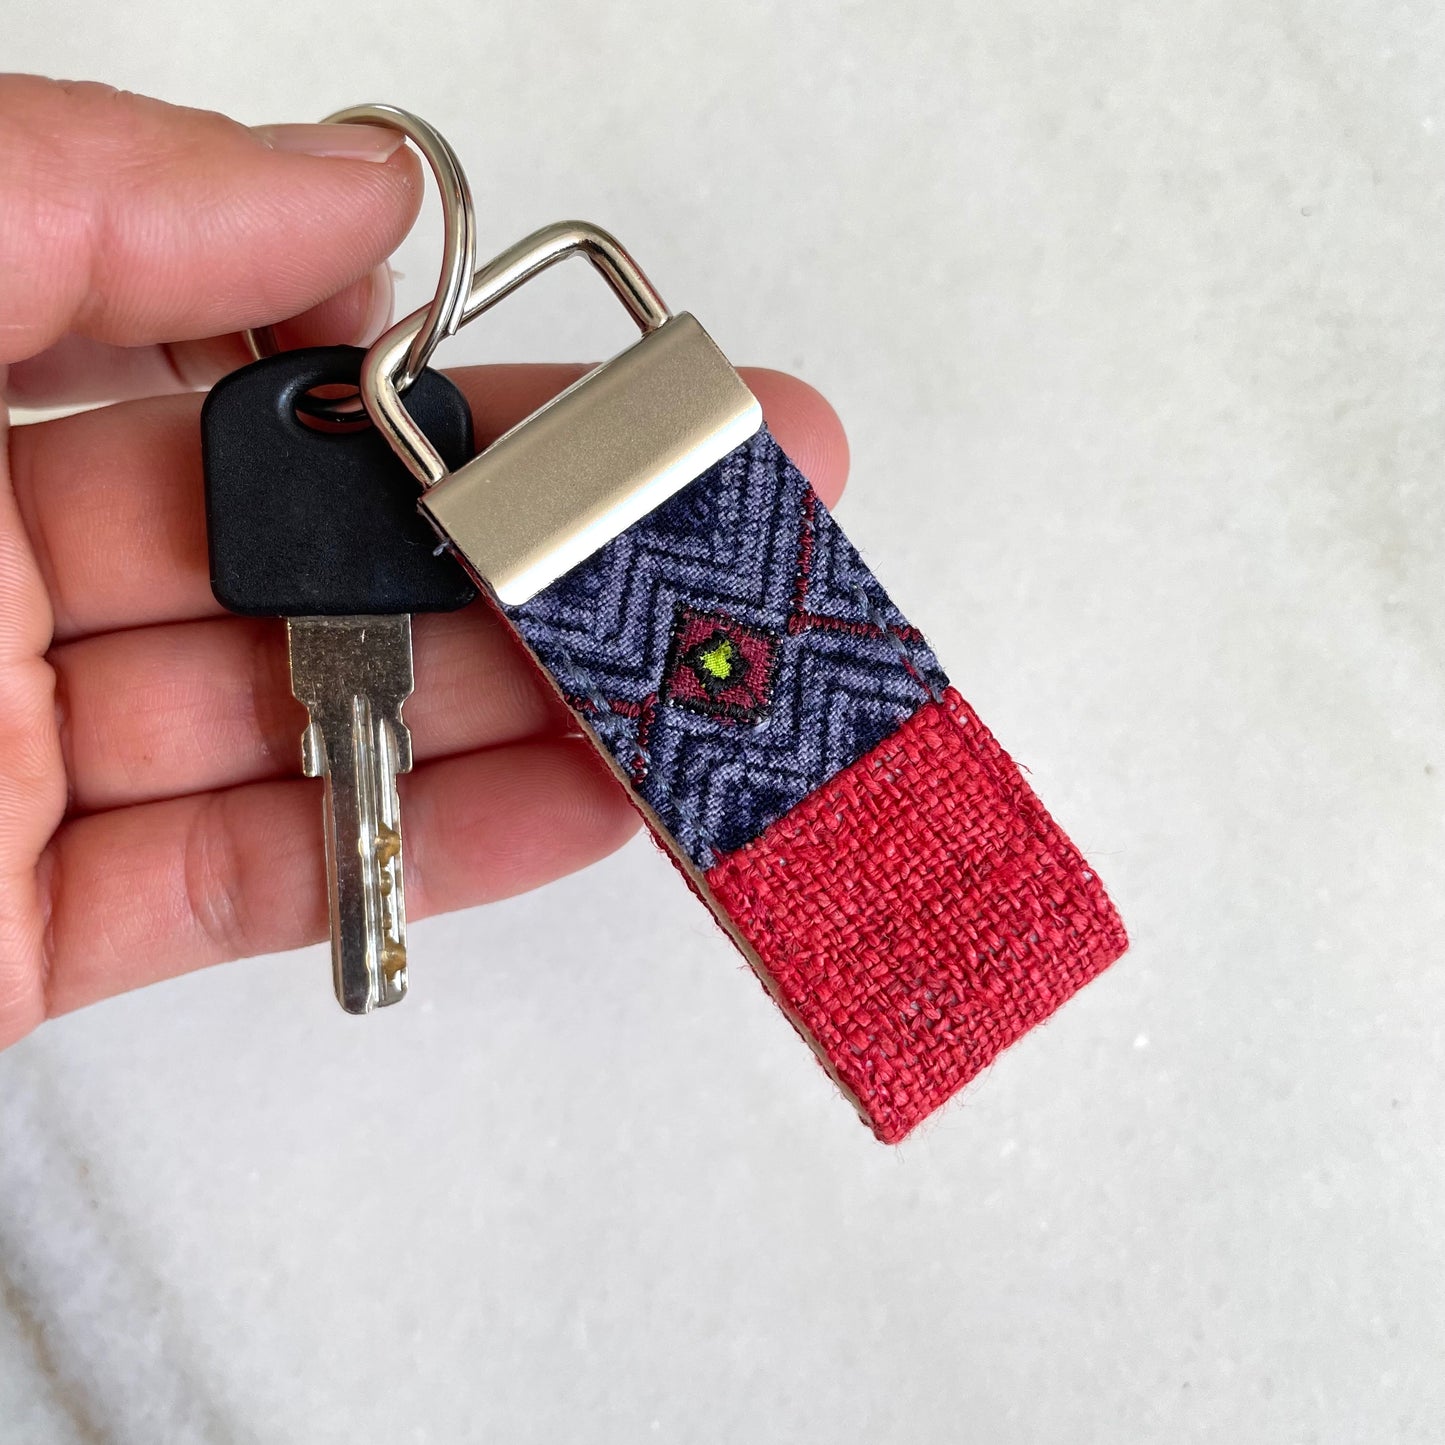 Red hemp fabric keychain with vintage batik patch, stainless metal key fob